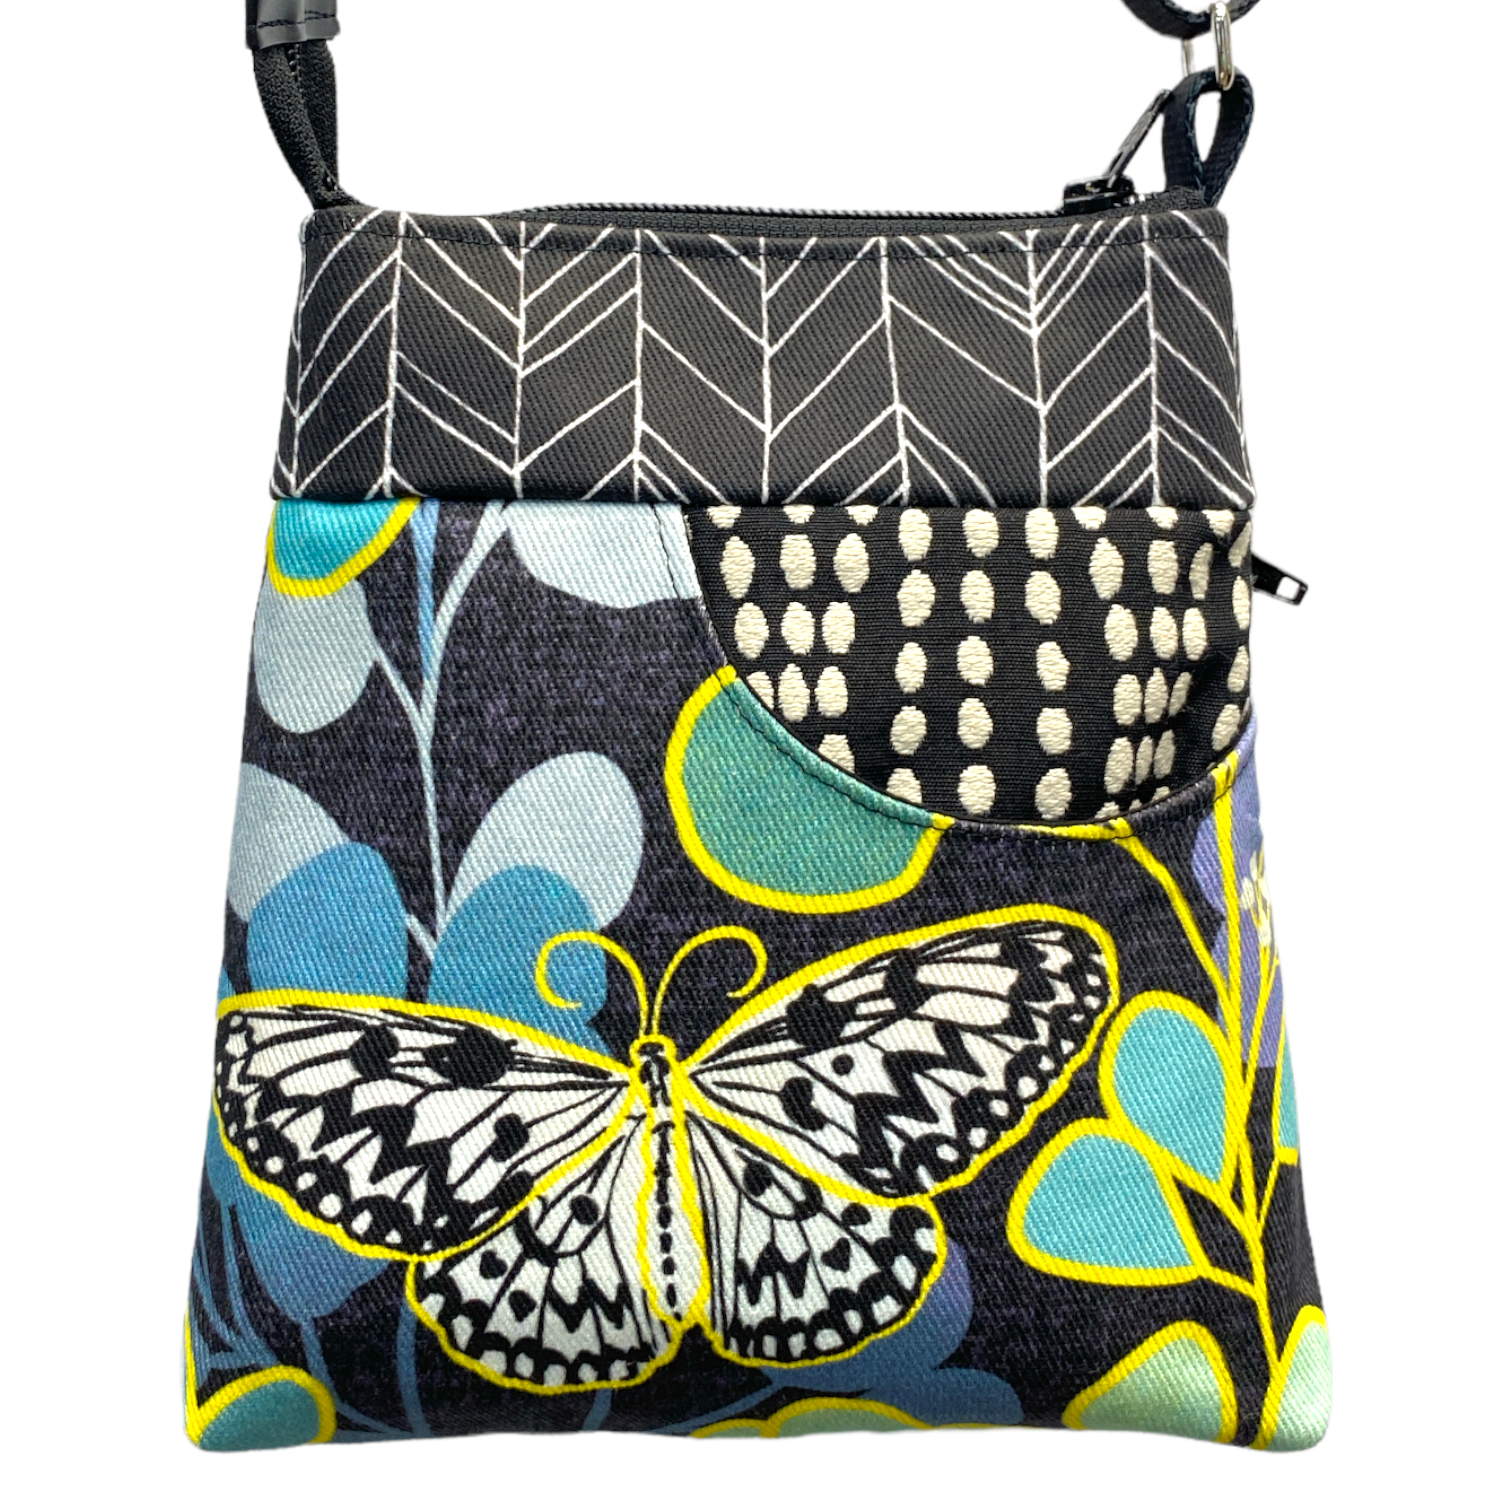 MIILK Bag Electric Butterfly / Black & White Wavy Dots